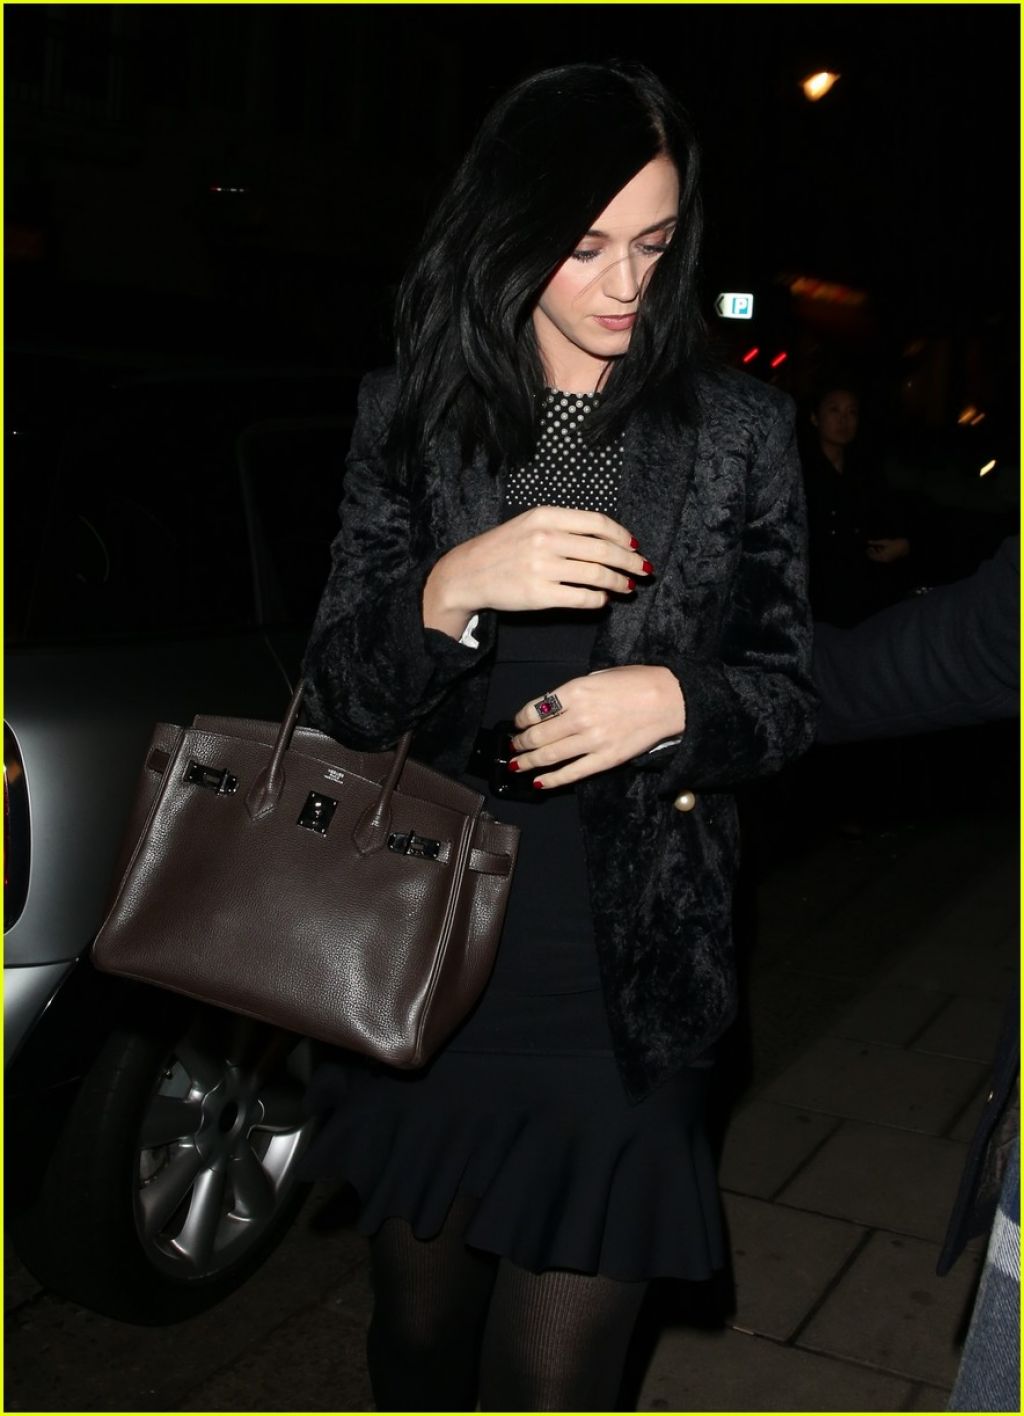 Katy Perry >> Single "Never Really Over" - Página 39 Katy-perry-style-leaving-restaurant-34-in-london-december-2013_6